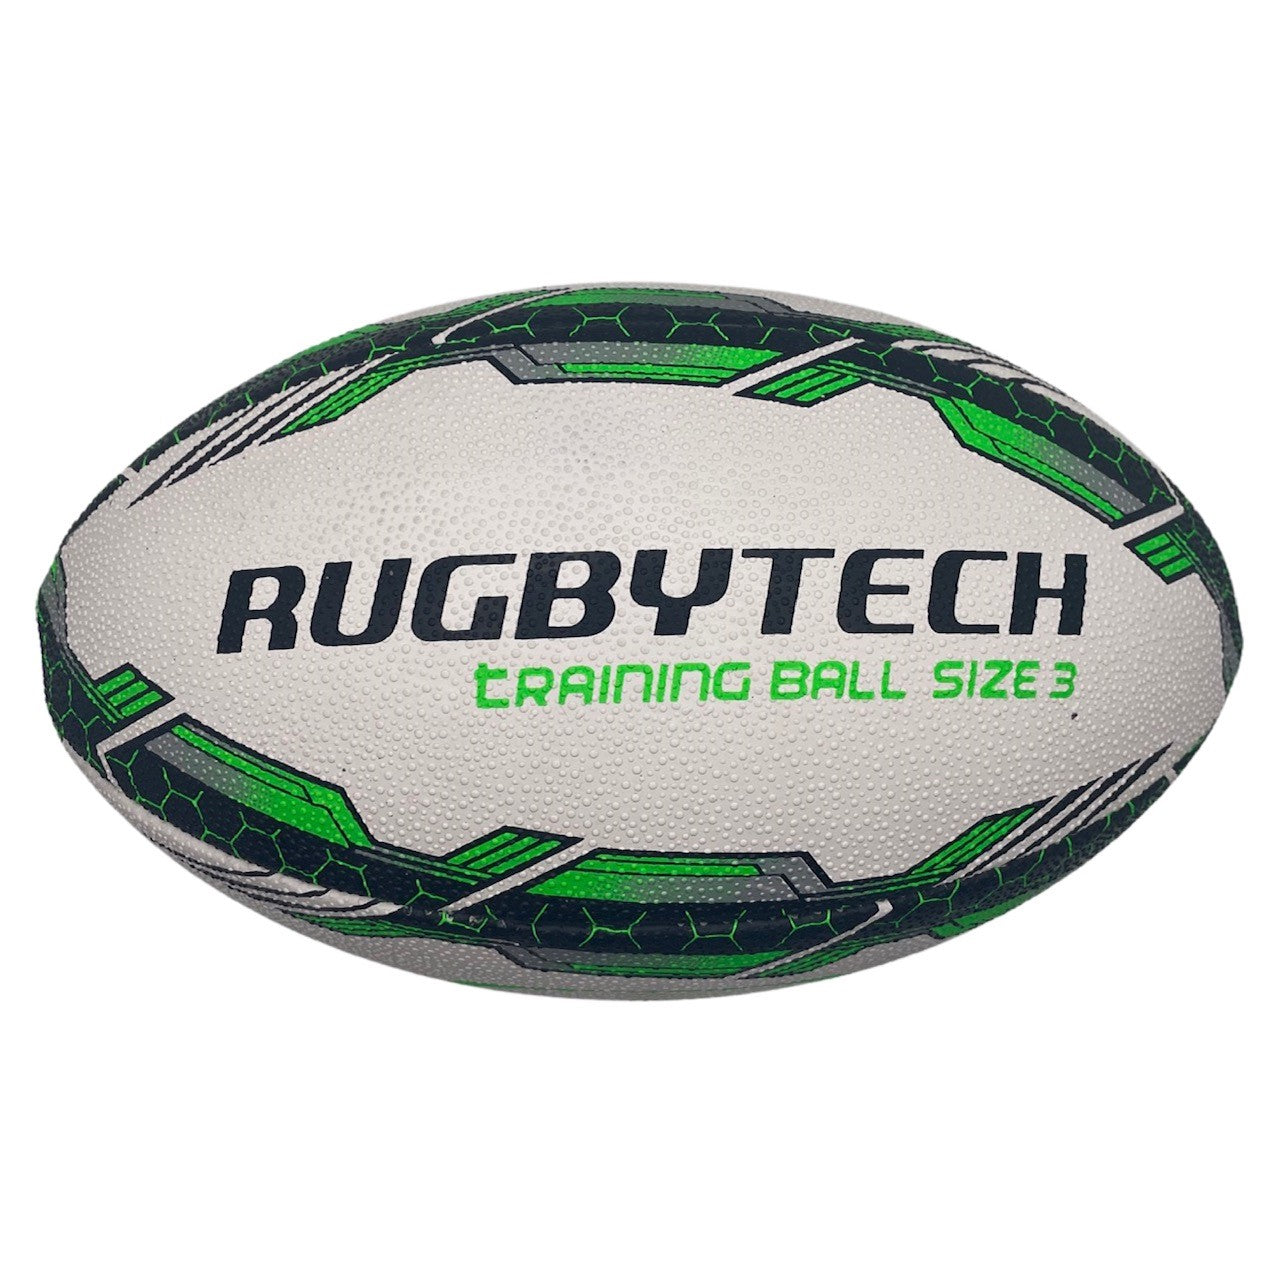 Rugbytech Rugby Ball Size 3